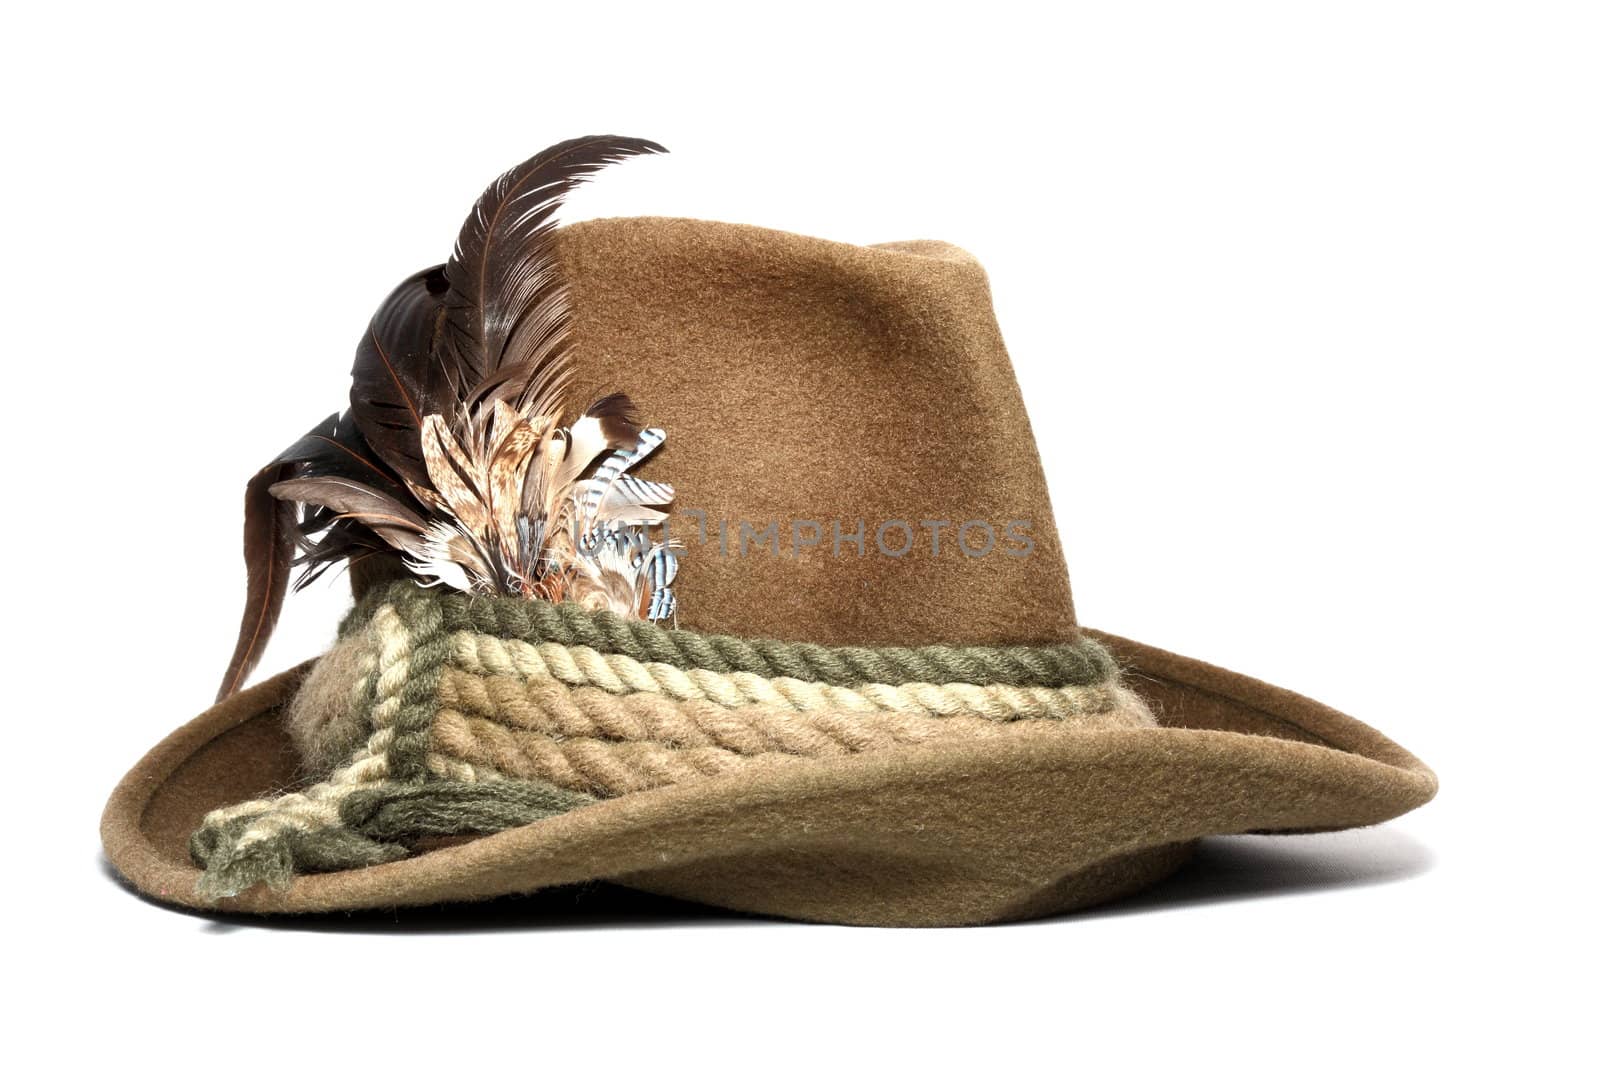 vintage woolen hunting hat decorated with feathers over white background